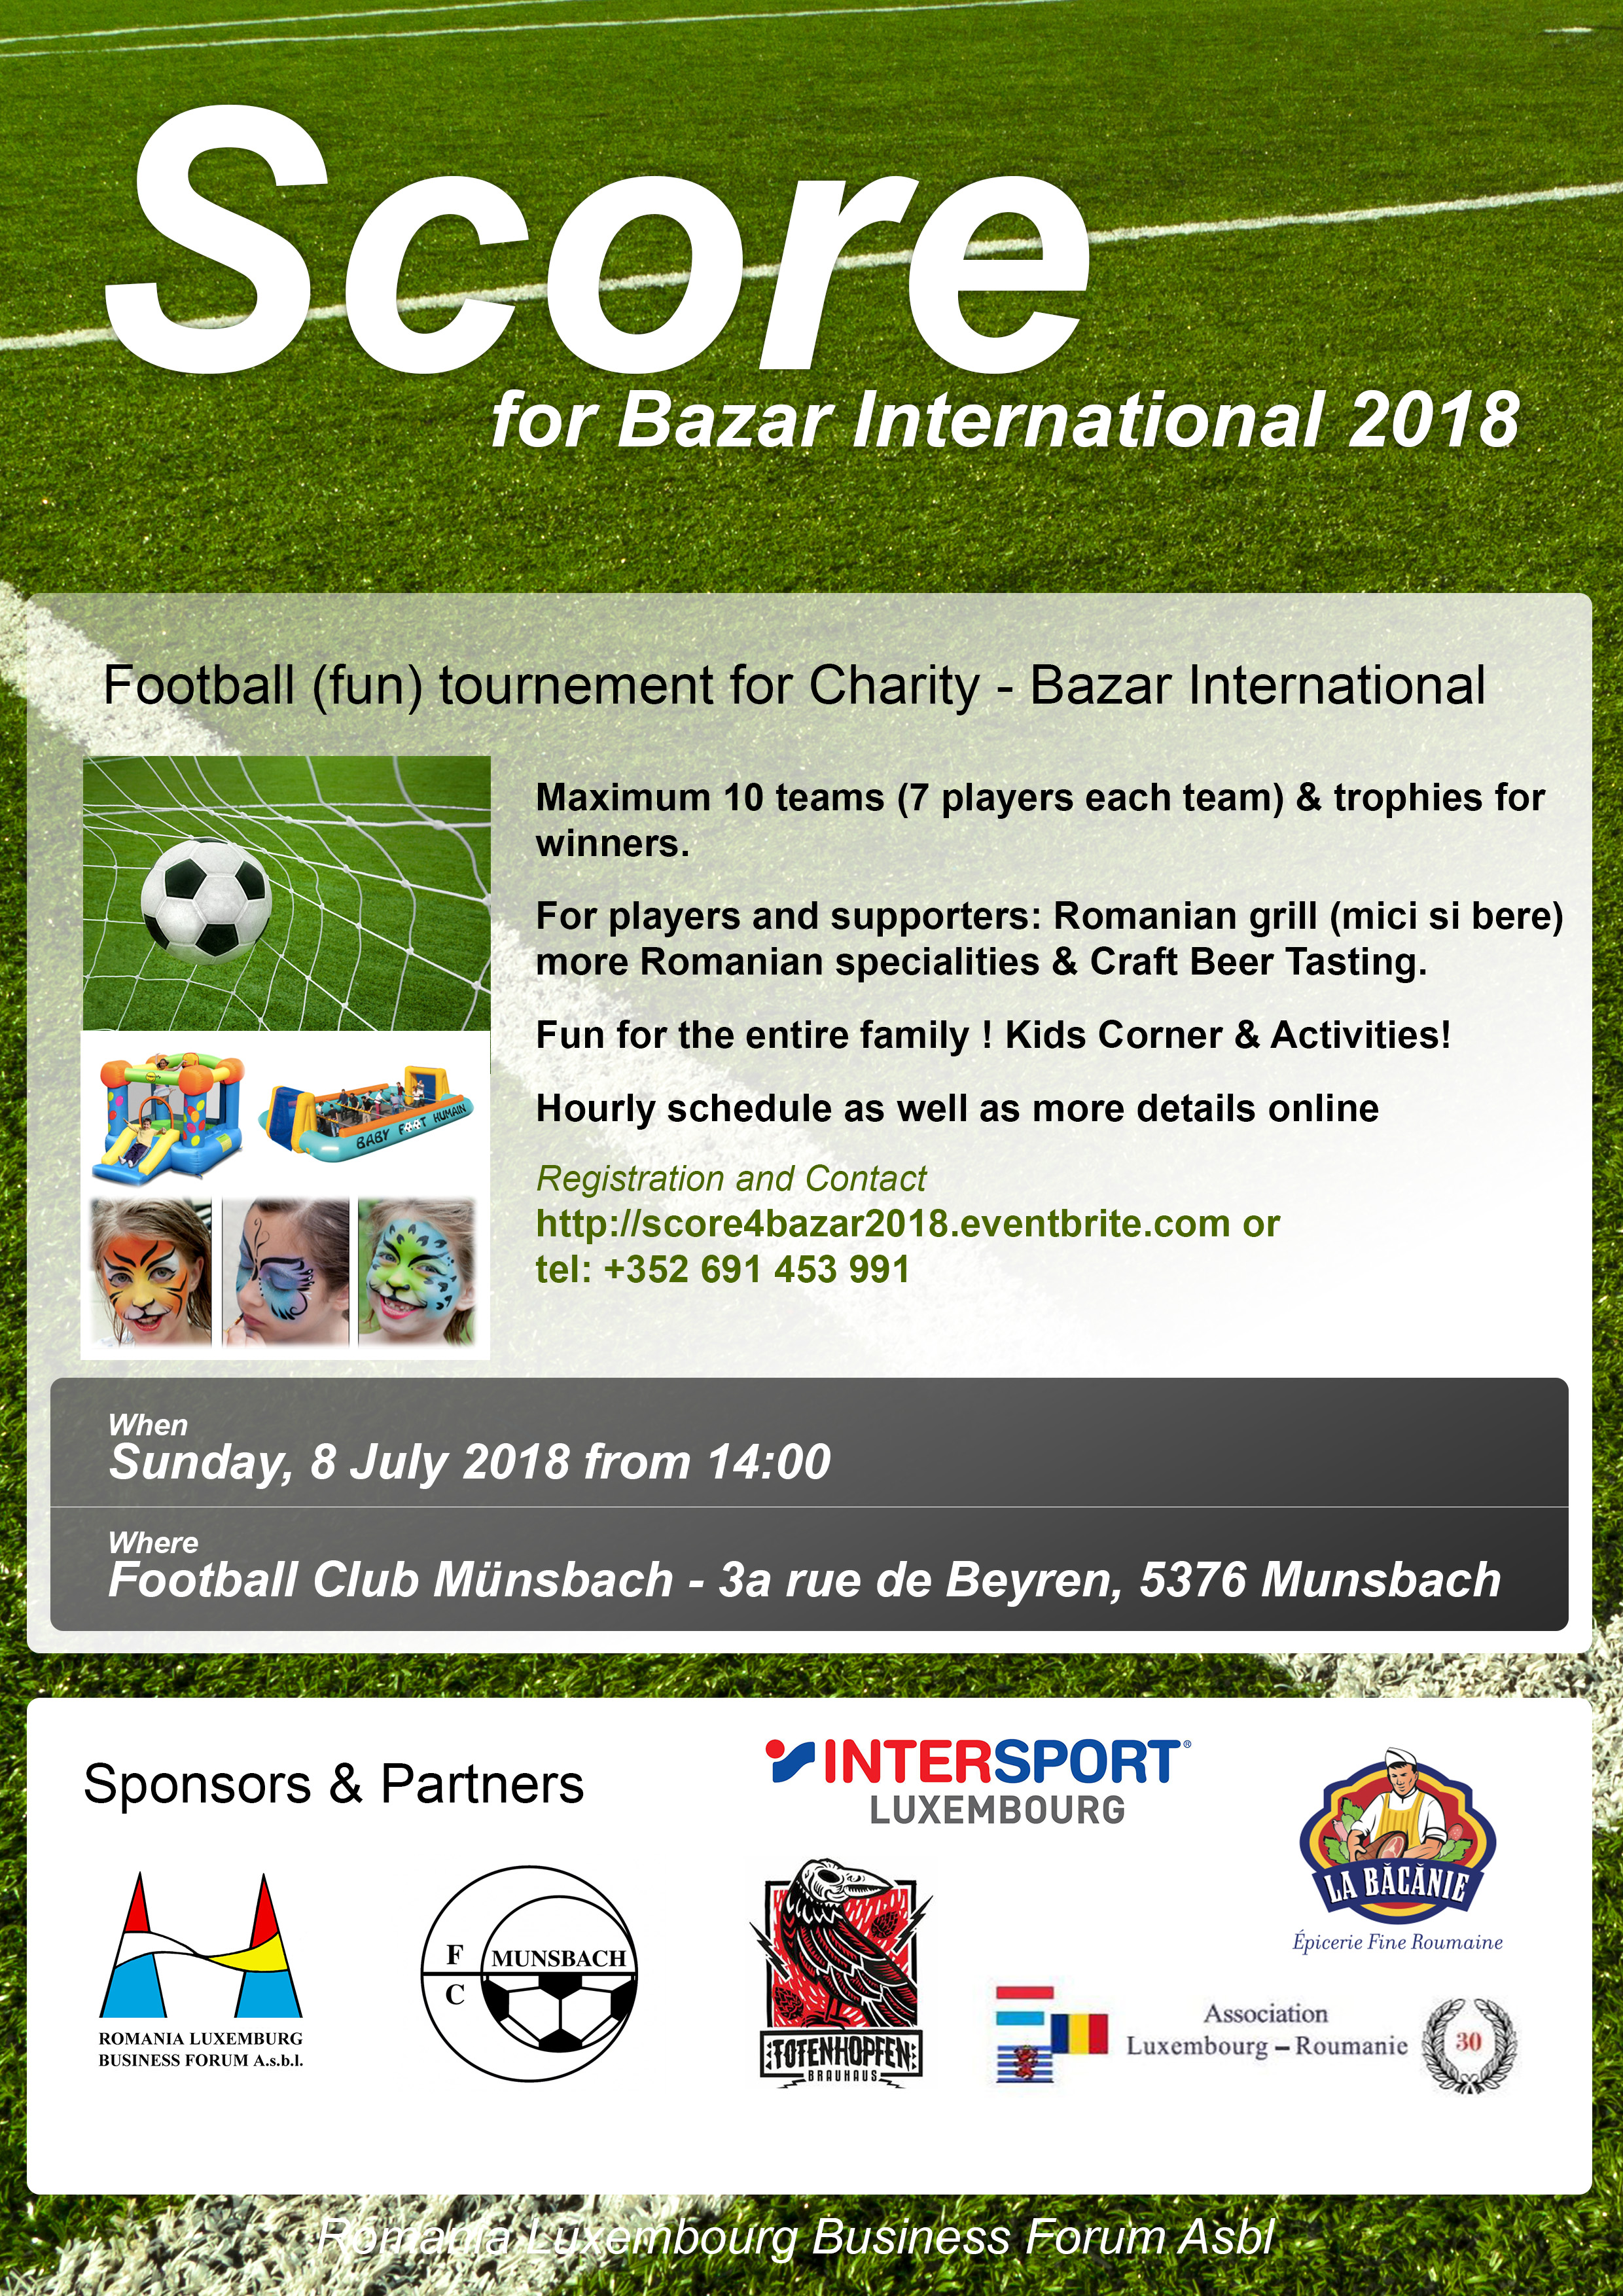 Football Tournement for Fun & Charity